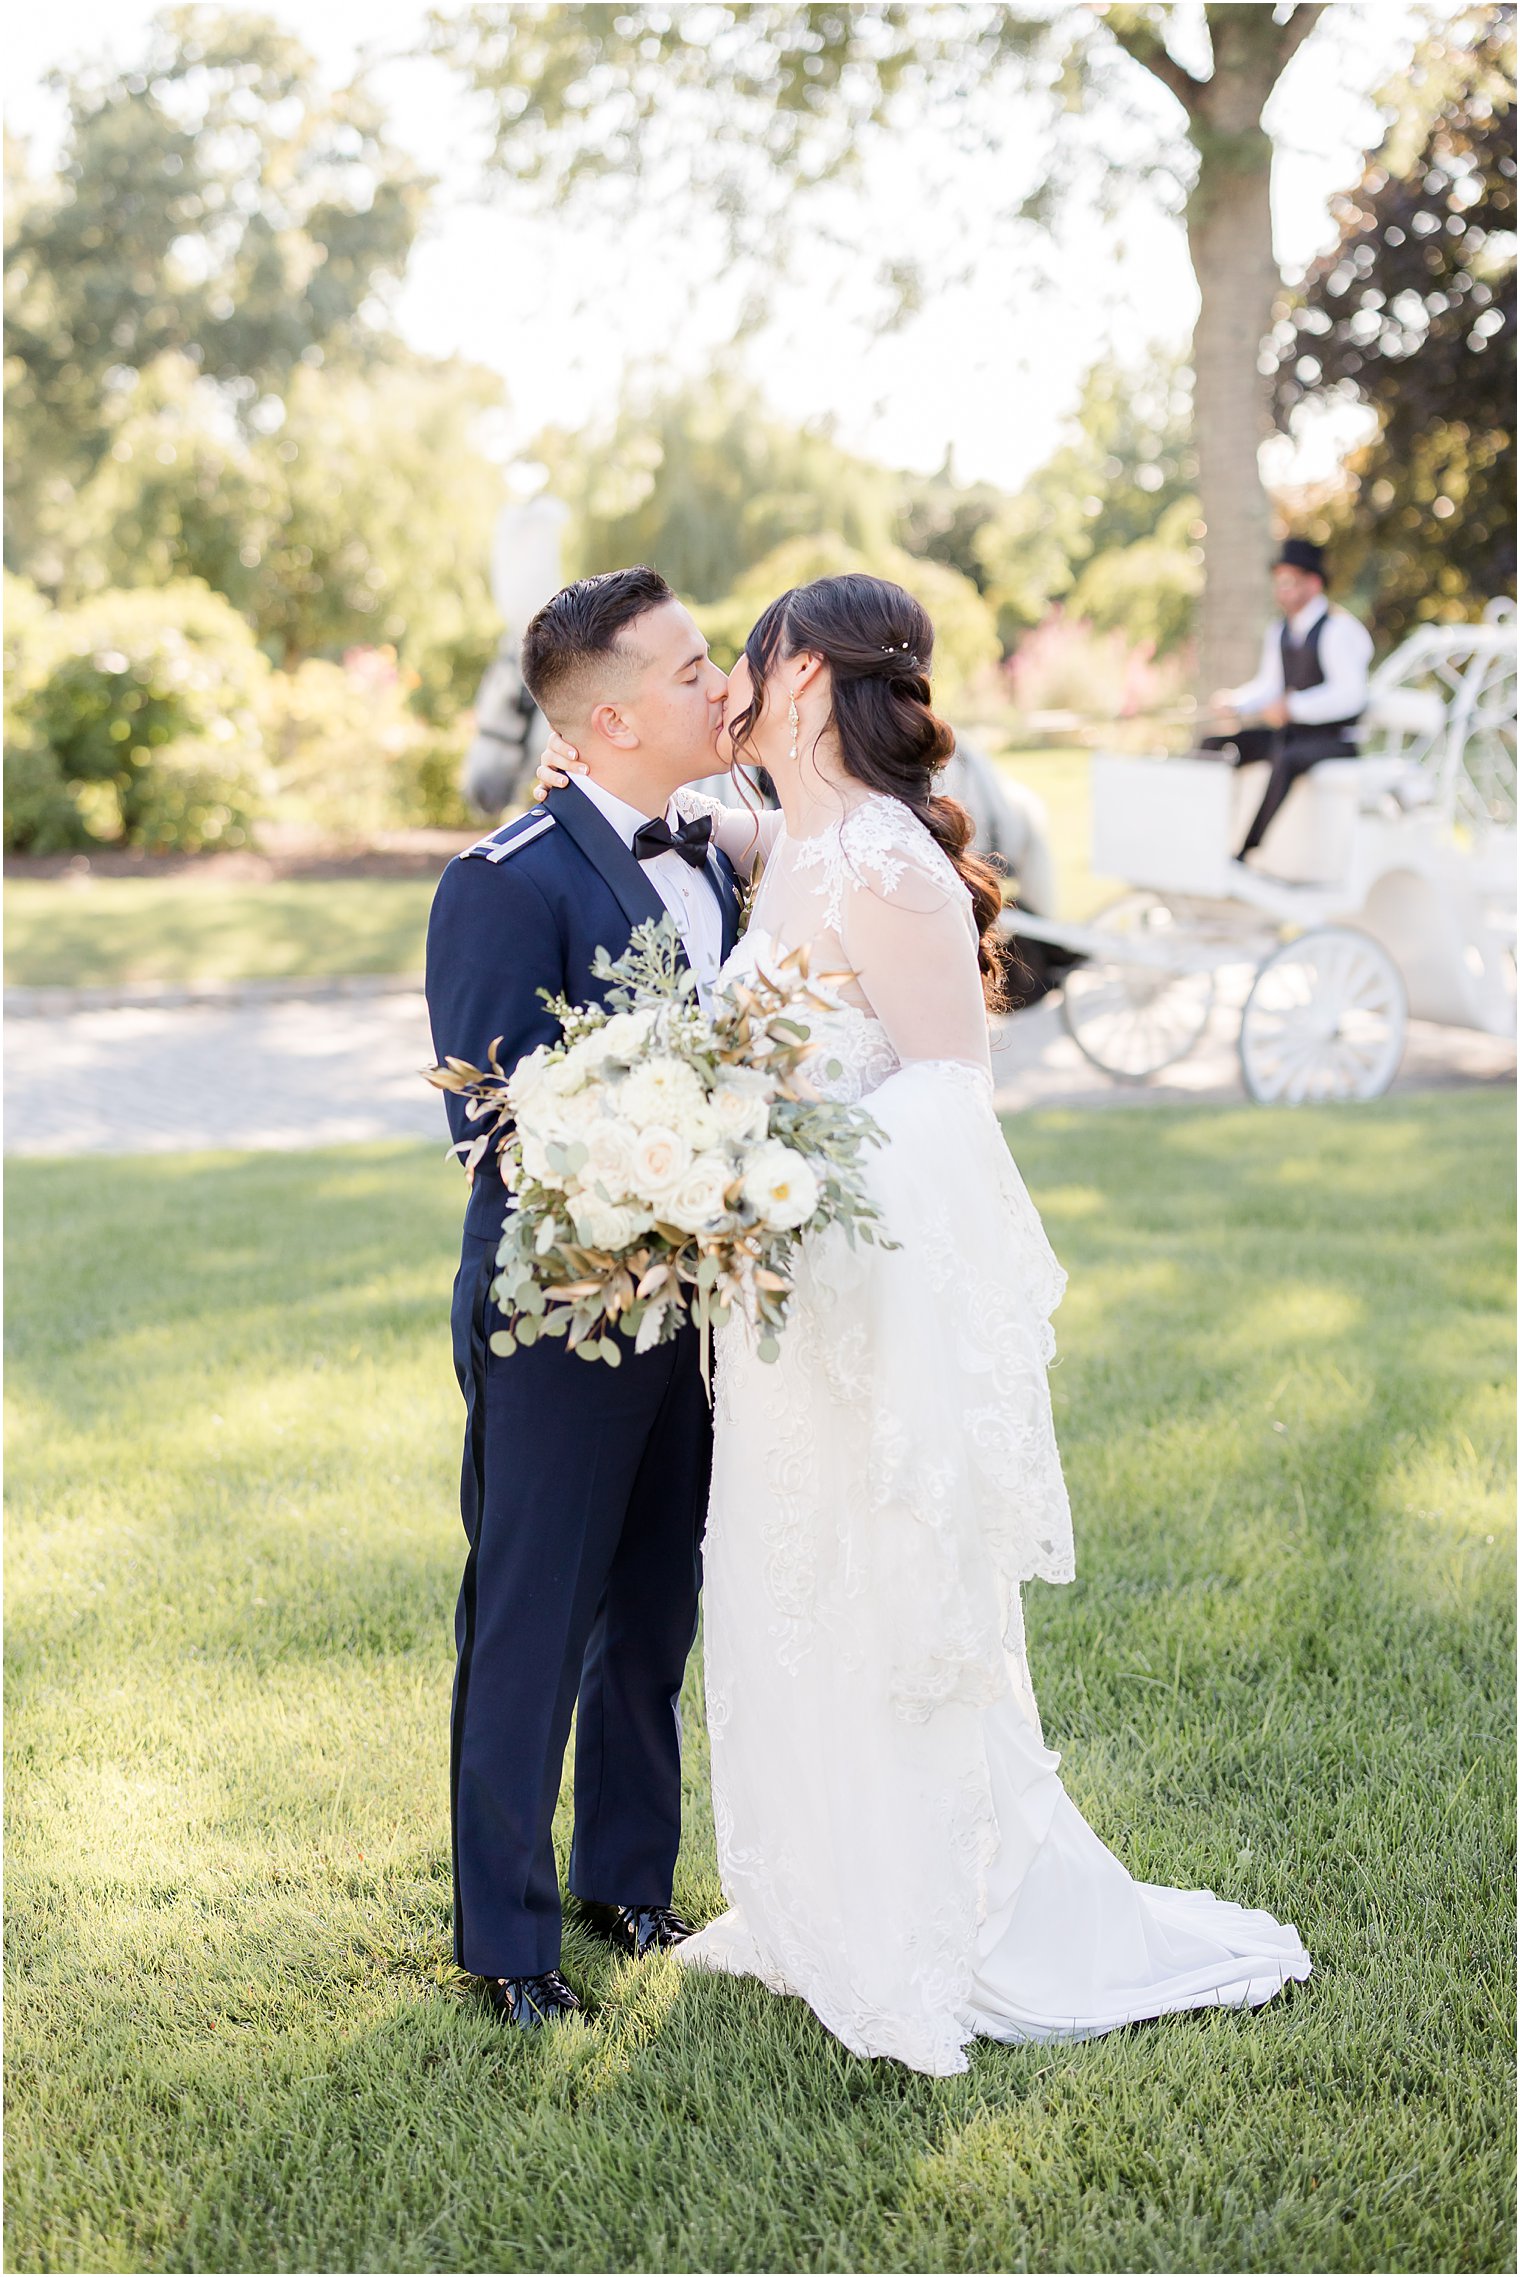 bride and groom kiss on lawn with carriage behind them at Park Chateau Estate